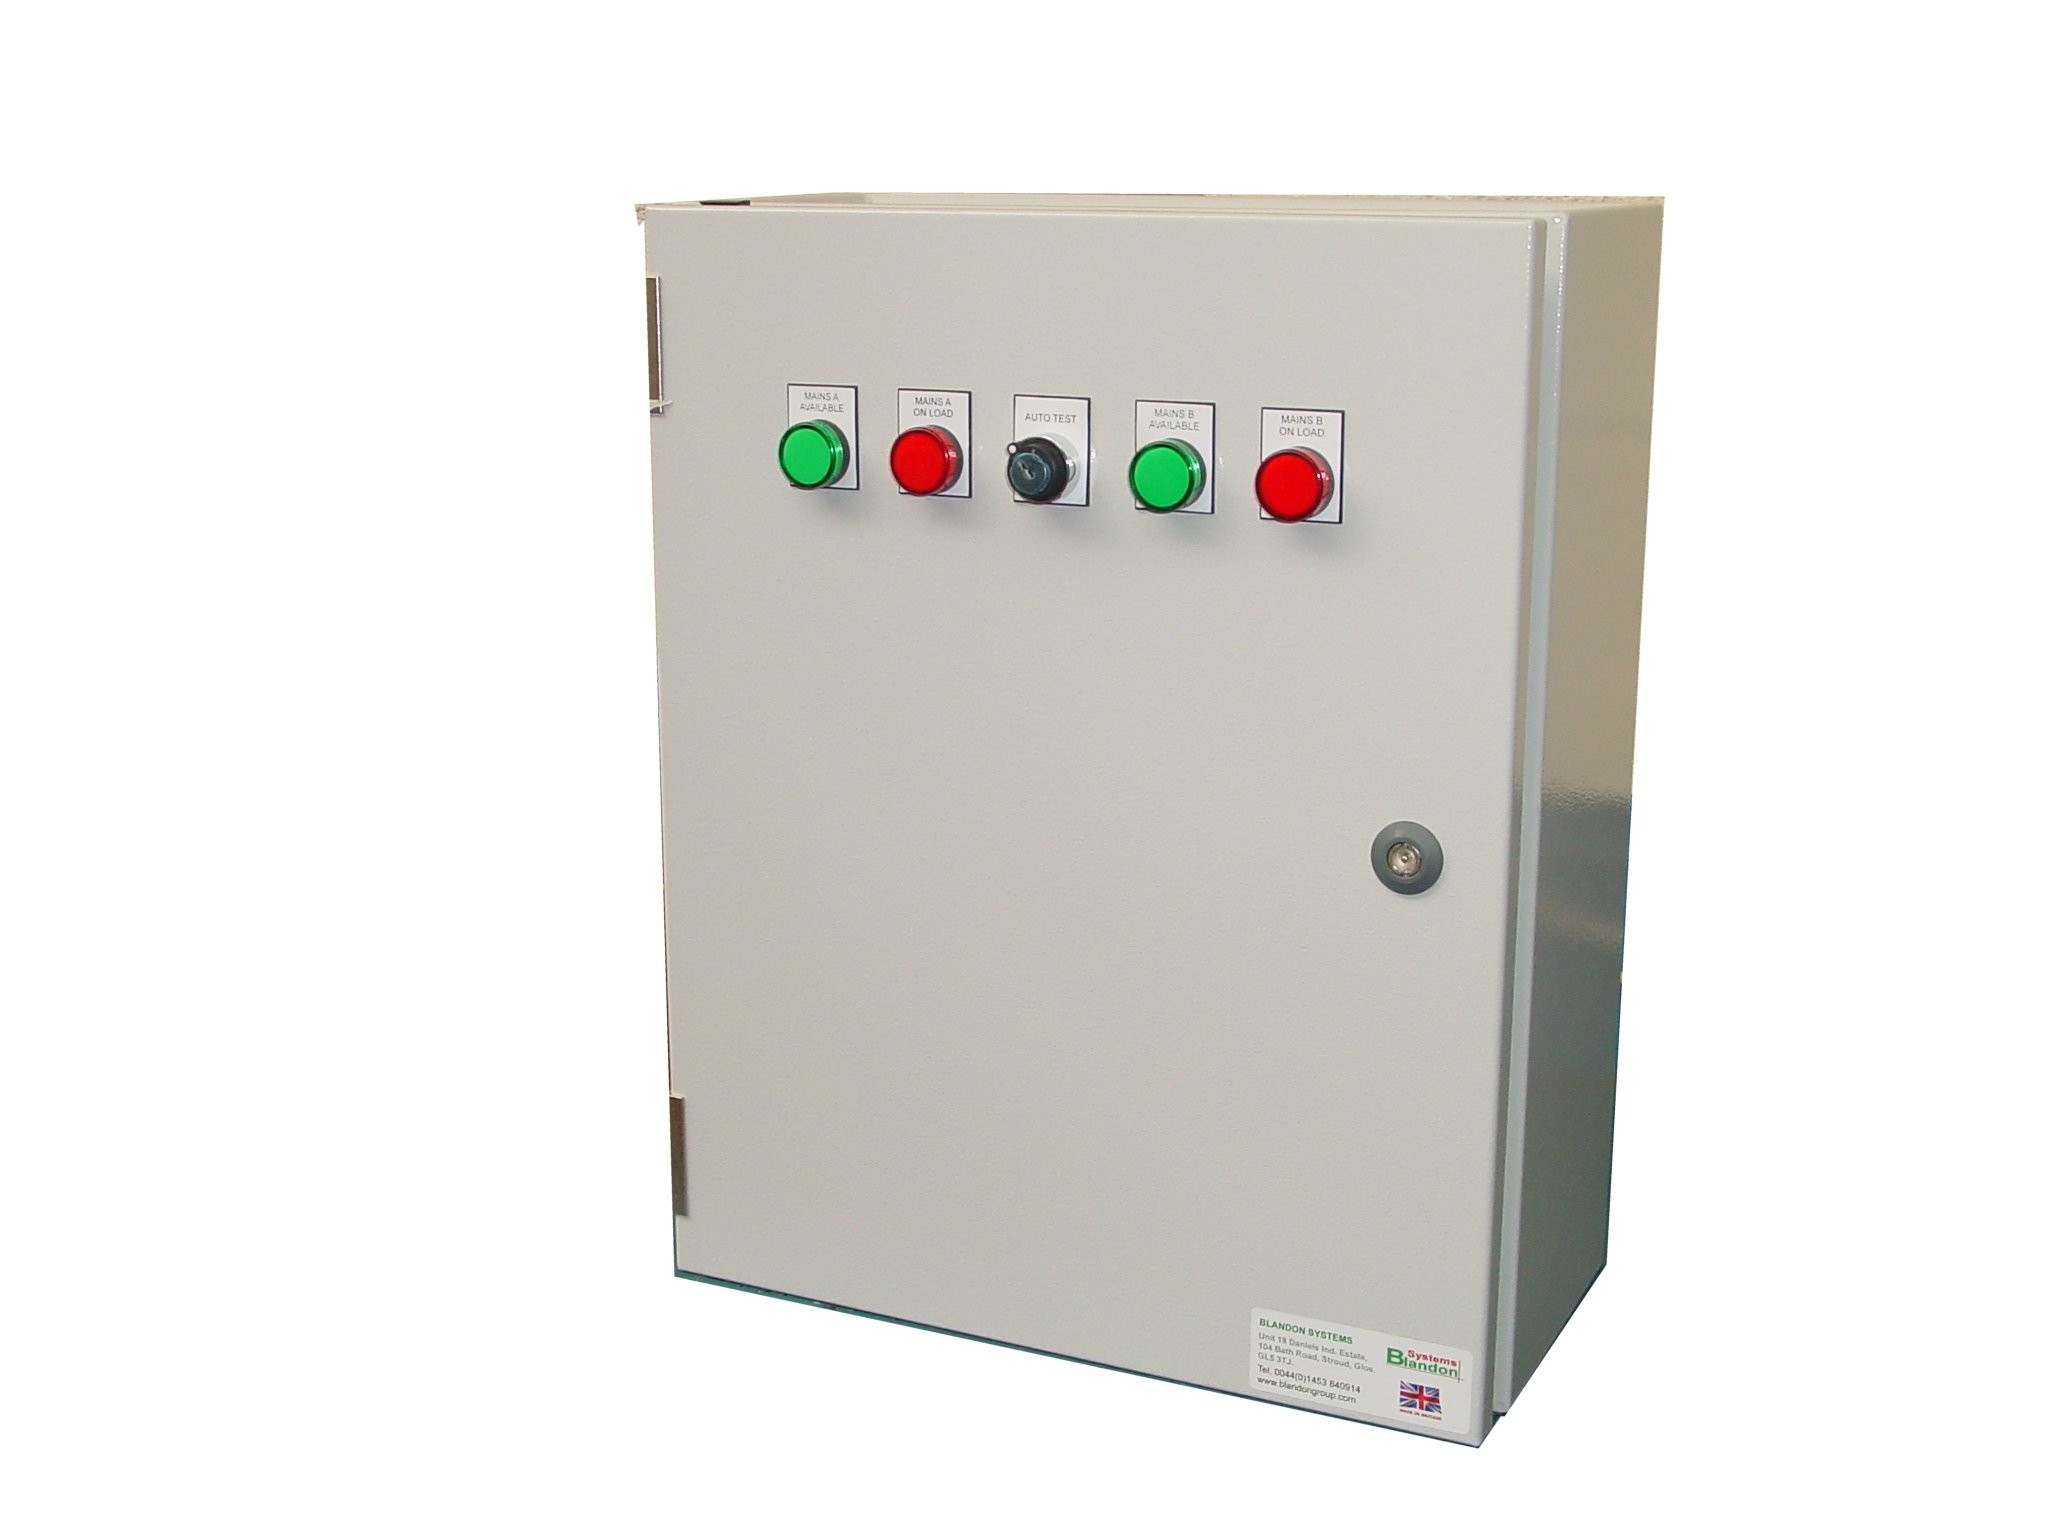 125A ATS 3 Phase Mains-Mains 400V, UVR Controlled, ABB Contactors